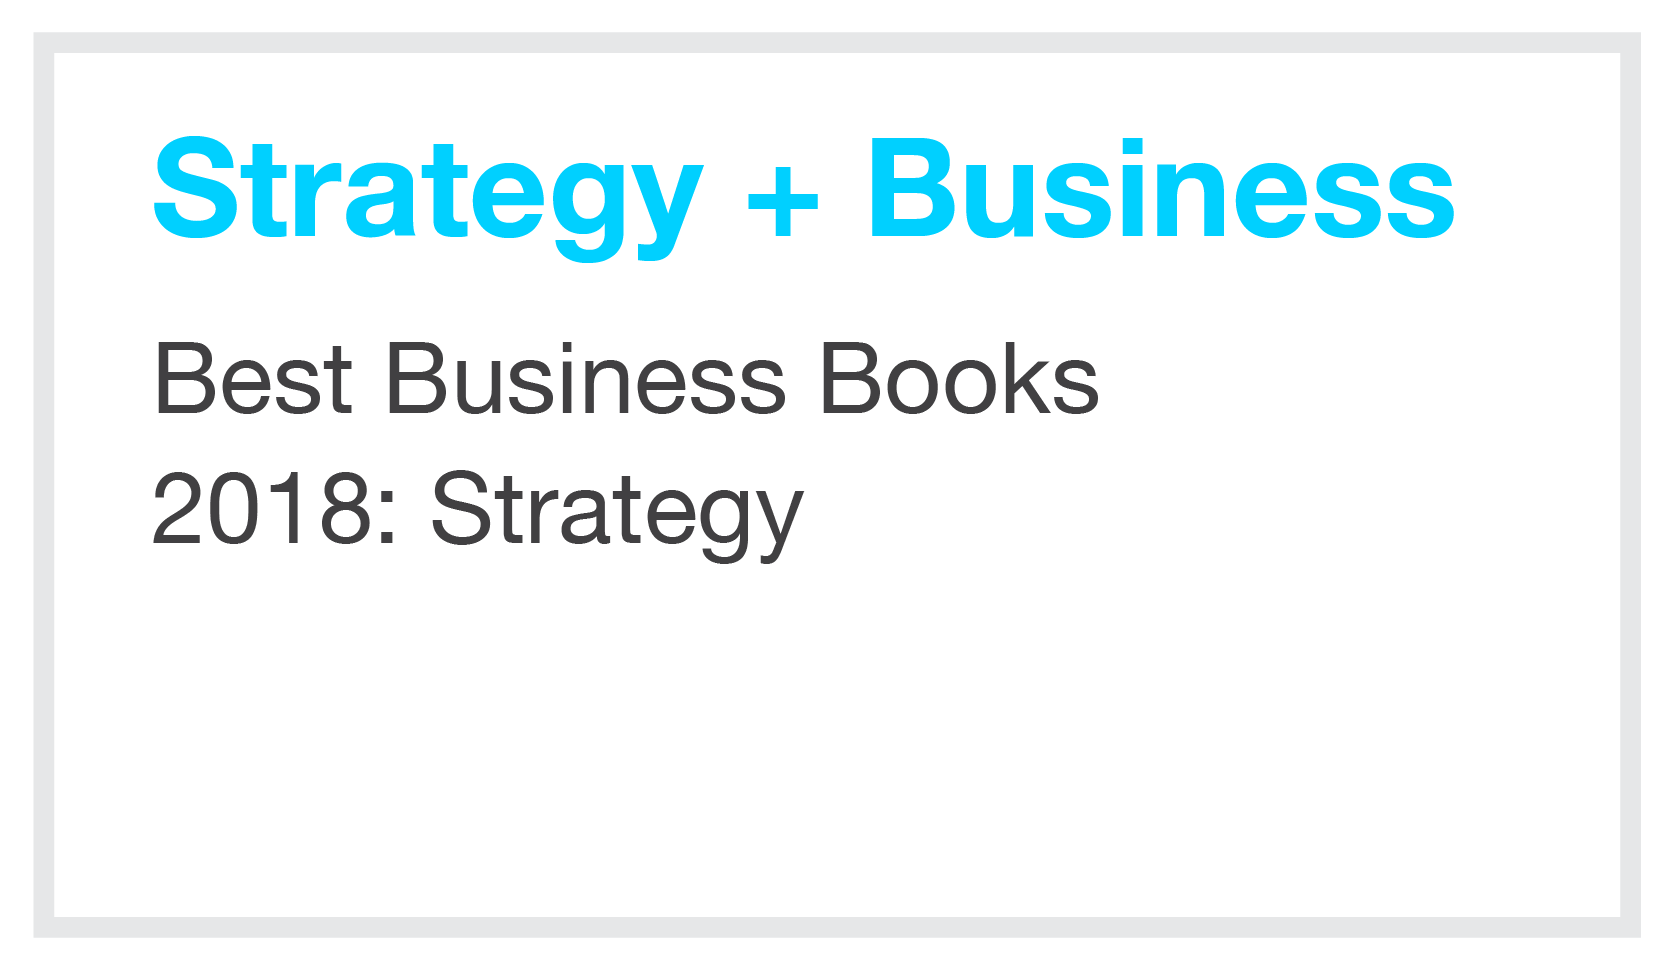 Strategy + Business